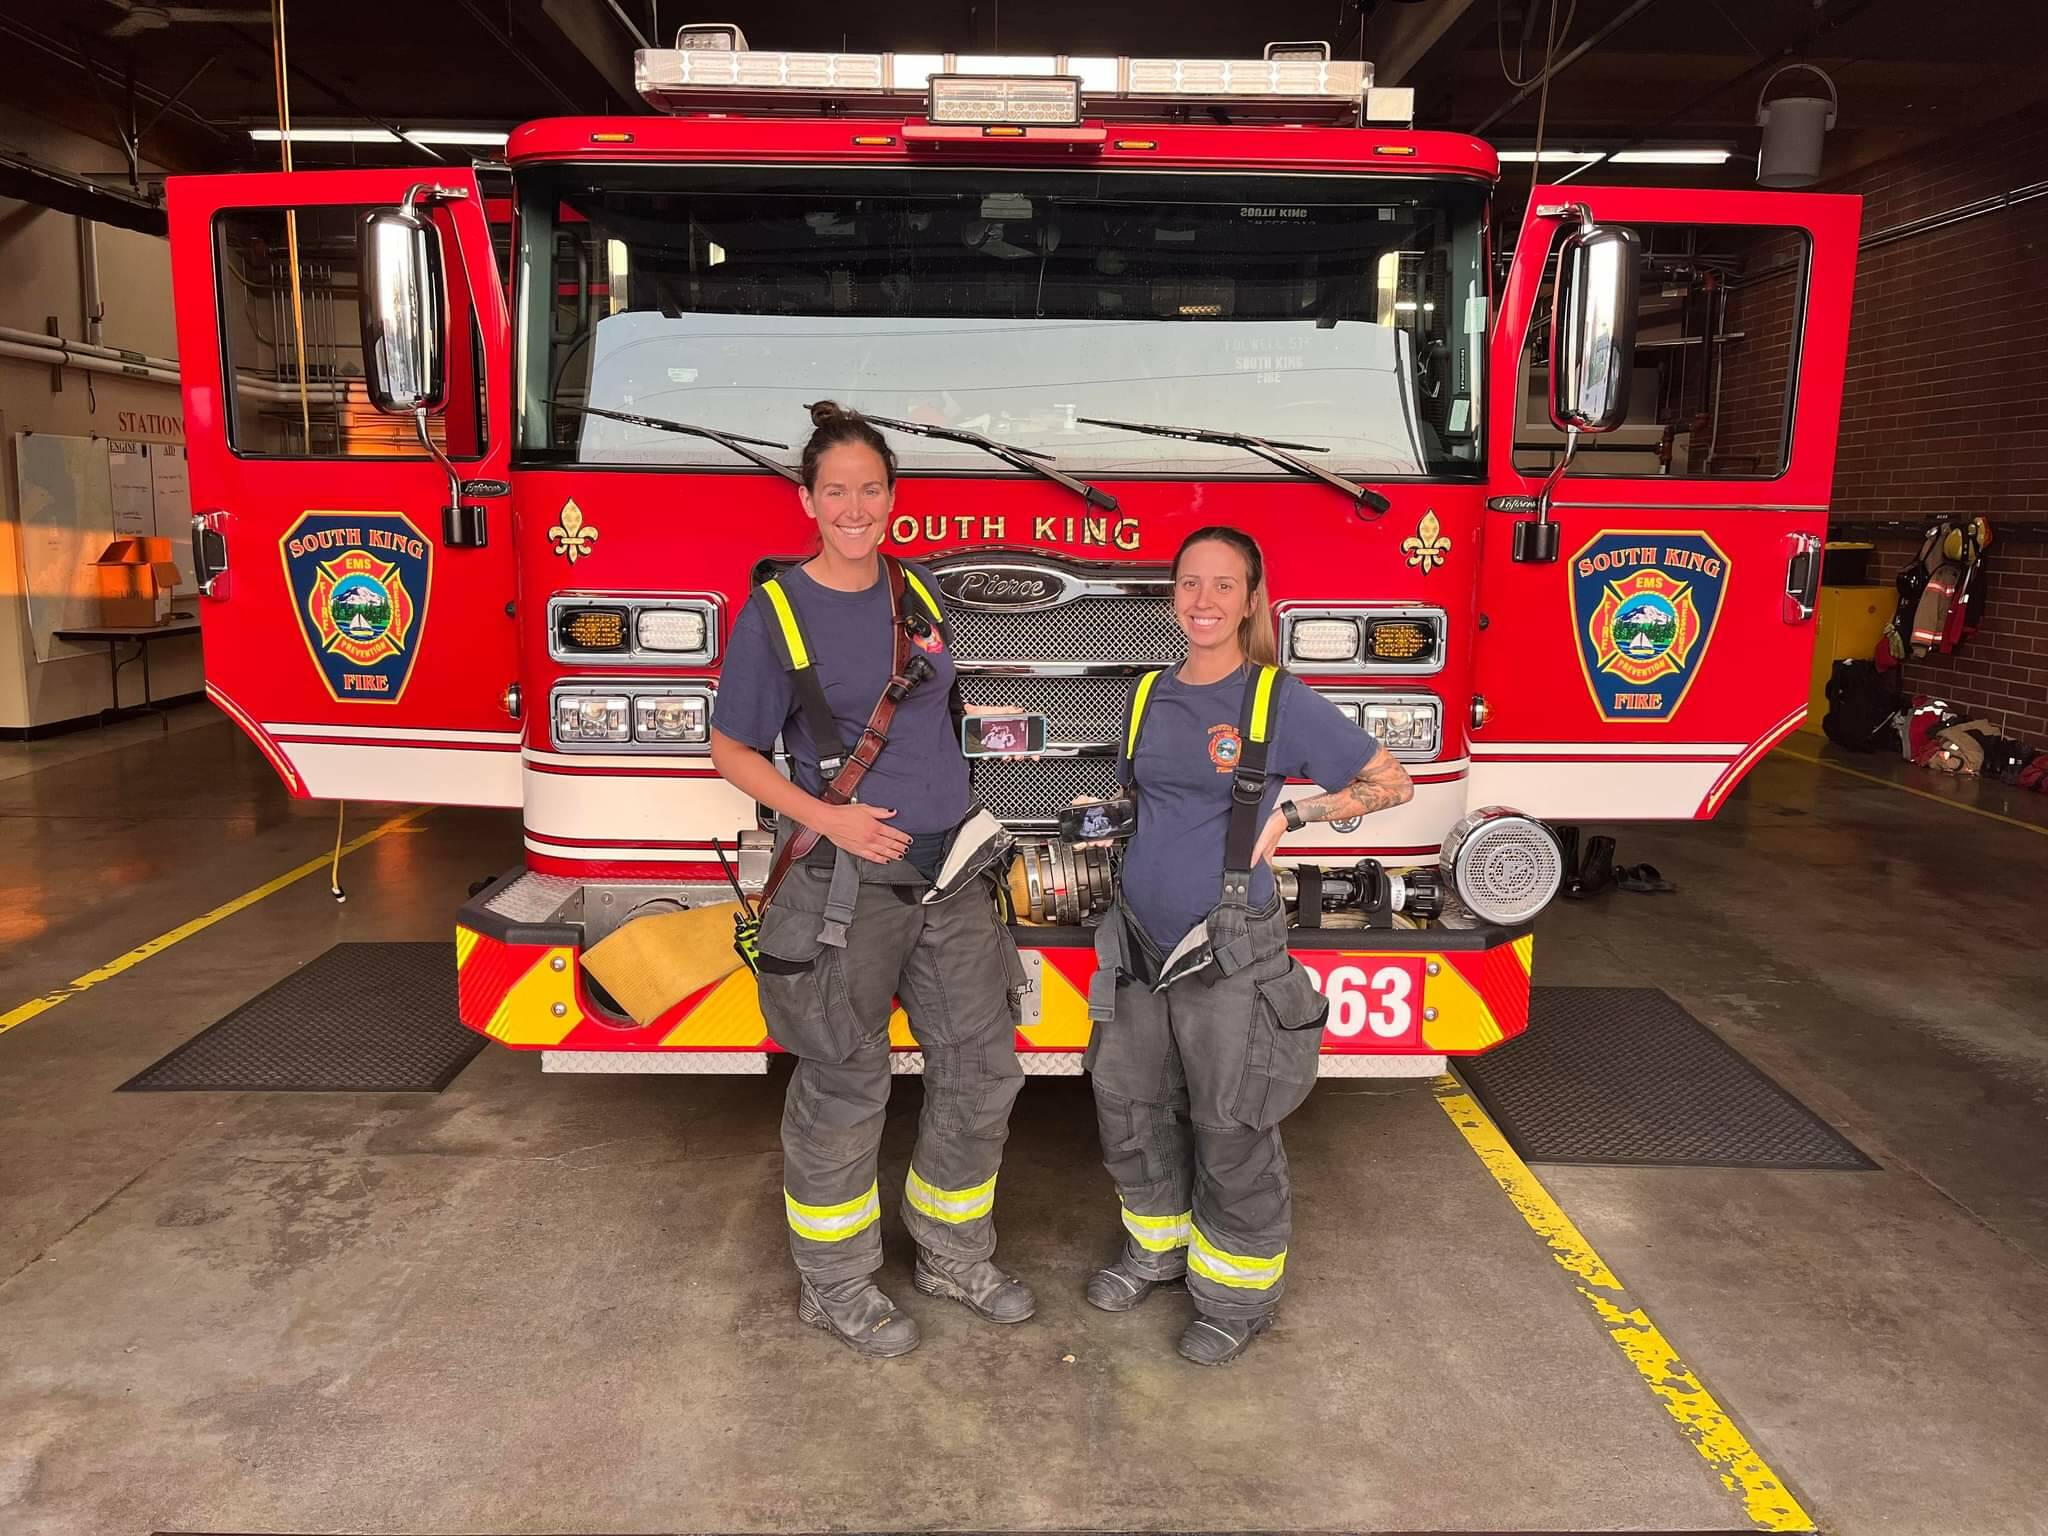 Photo courtesy of Ann Hoag
Lt. Ann Hoag and firefighter Amanda Weed pose for a photo holding each of their ultrasound photos at Station 63 in October 2022.